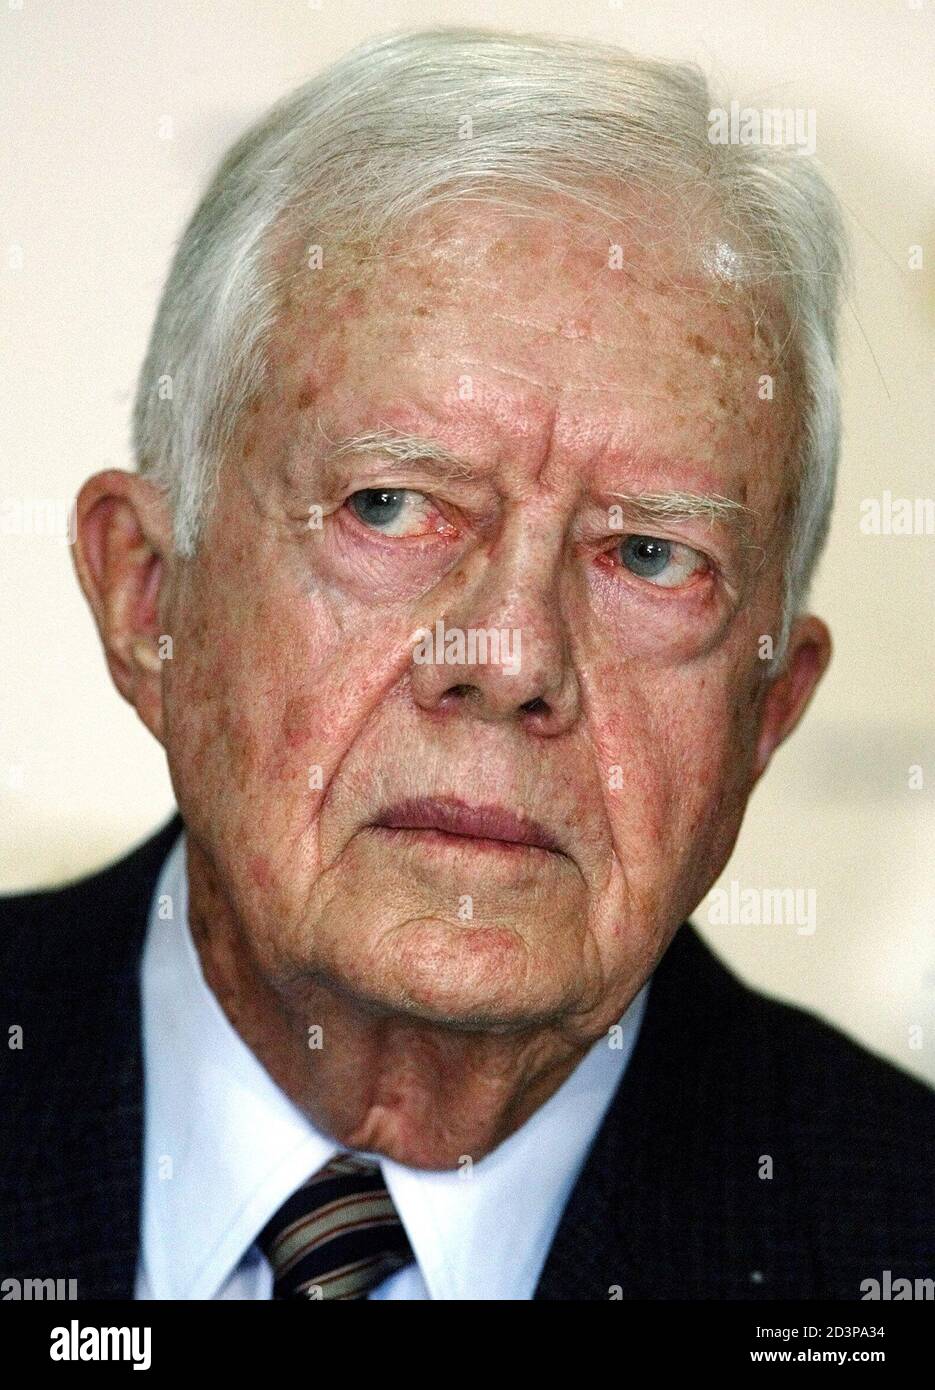 Former U.S. President Jimmy Carter listens to journalists during a press conference in Caracas, January 27, 2004. Venezuelan President Hugo Chavez told Carter he would submit to a recall vote, if required, and allow foreign observers to check the electoral process - 'even under the carpet.' After talks in Caracas with the 2002 Nobel Peace Prize winner, Chavez said he would allow observers from the Organization of American States and the Carter Center to scrutinize every detail of the referendum process. REUTERS/Jorge Silva  JS/HB Stock Photo